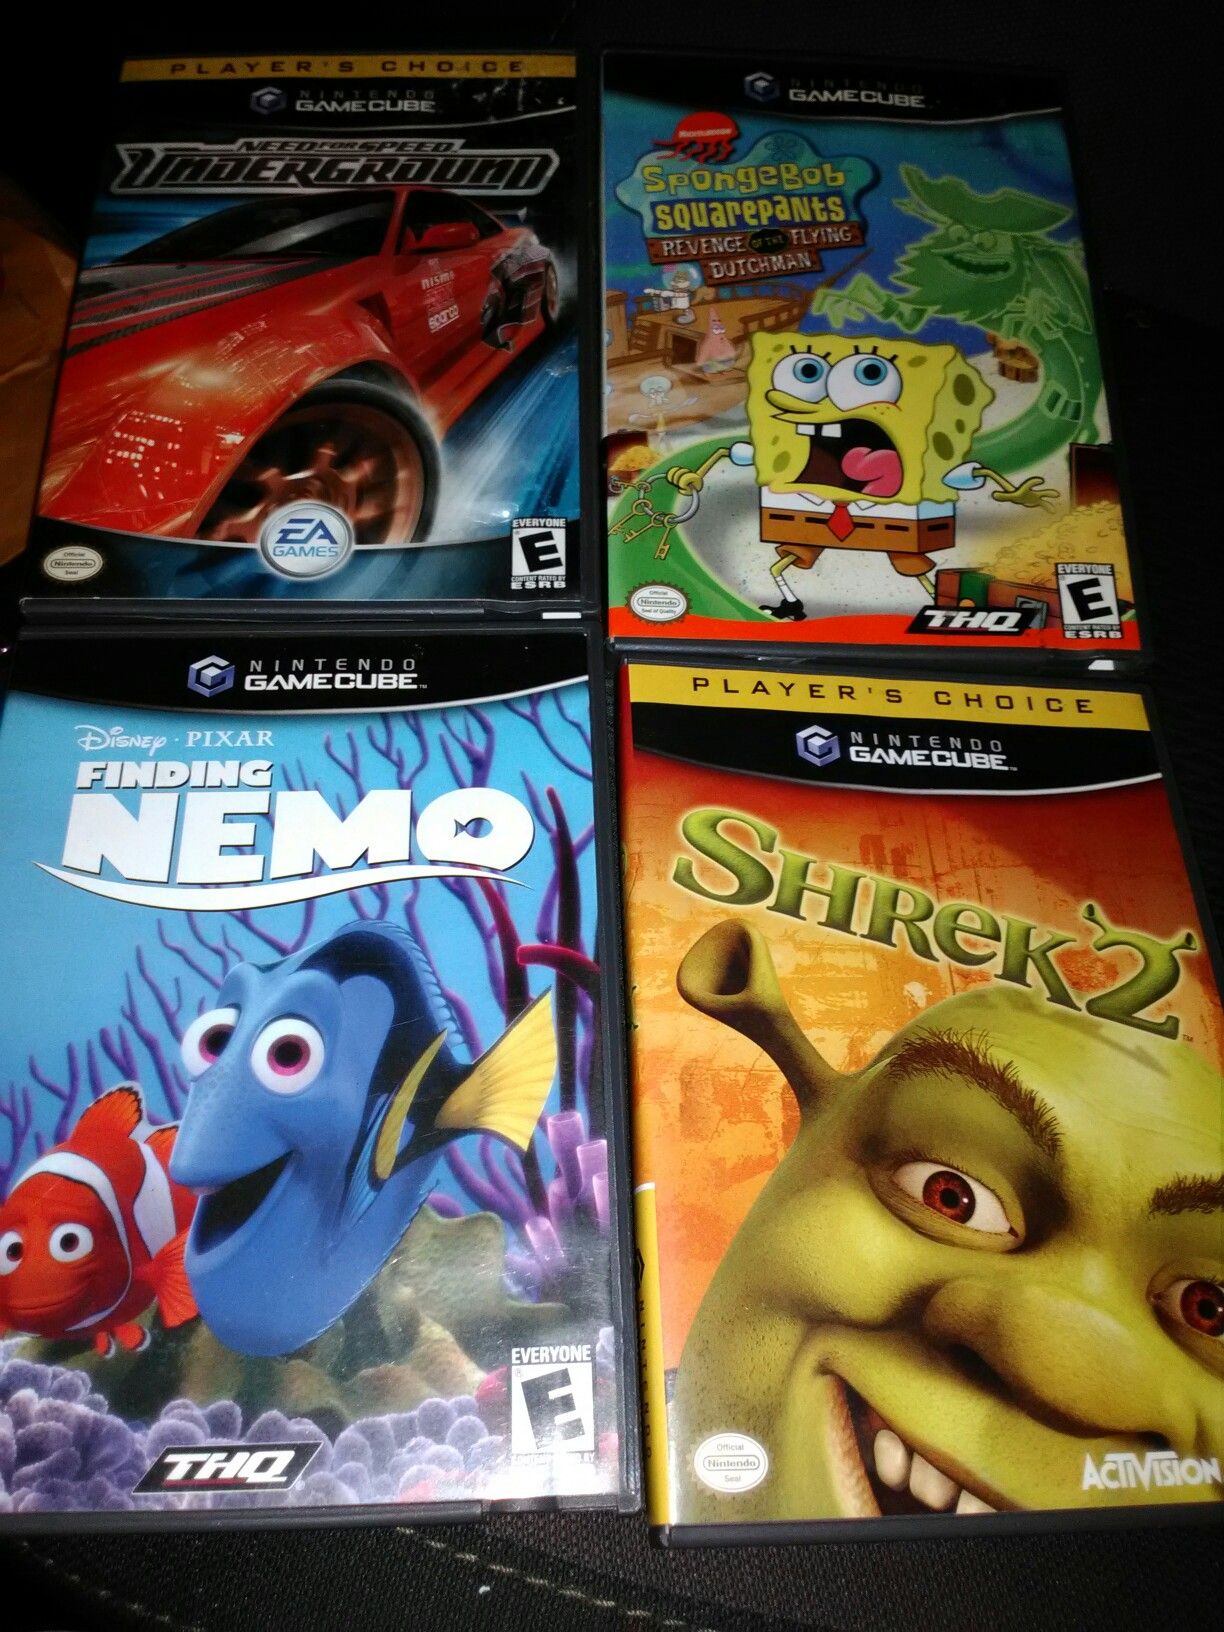 4 GameCube games for $15